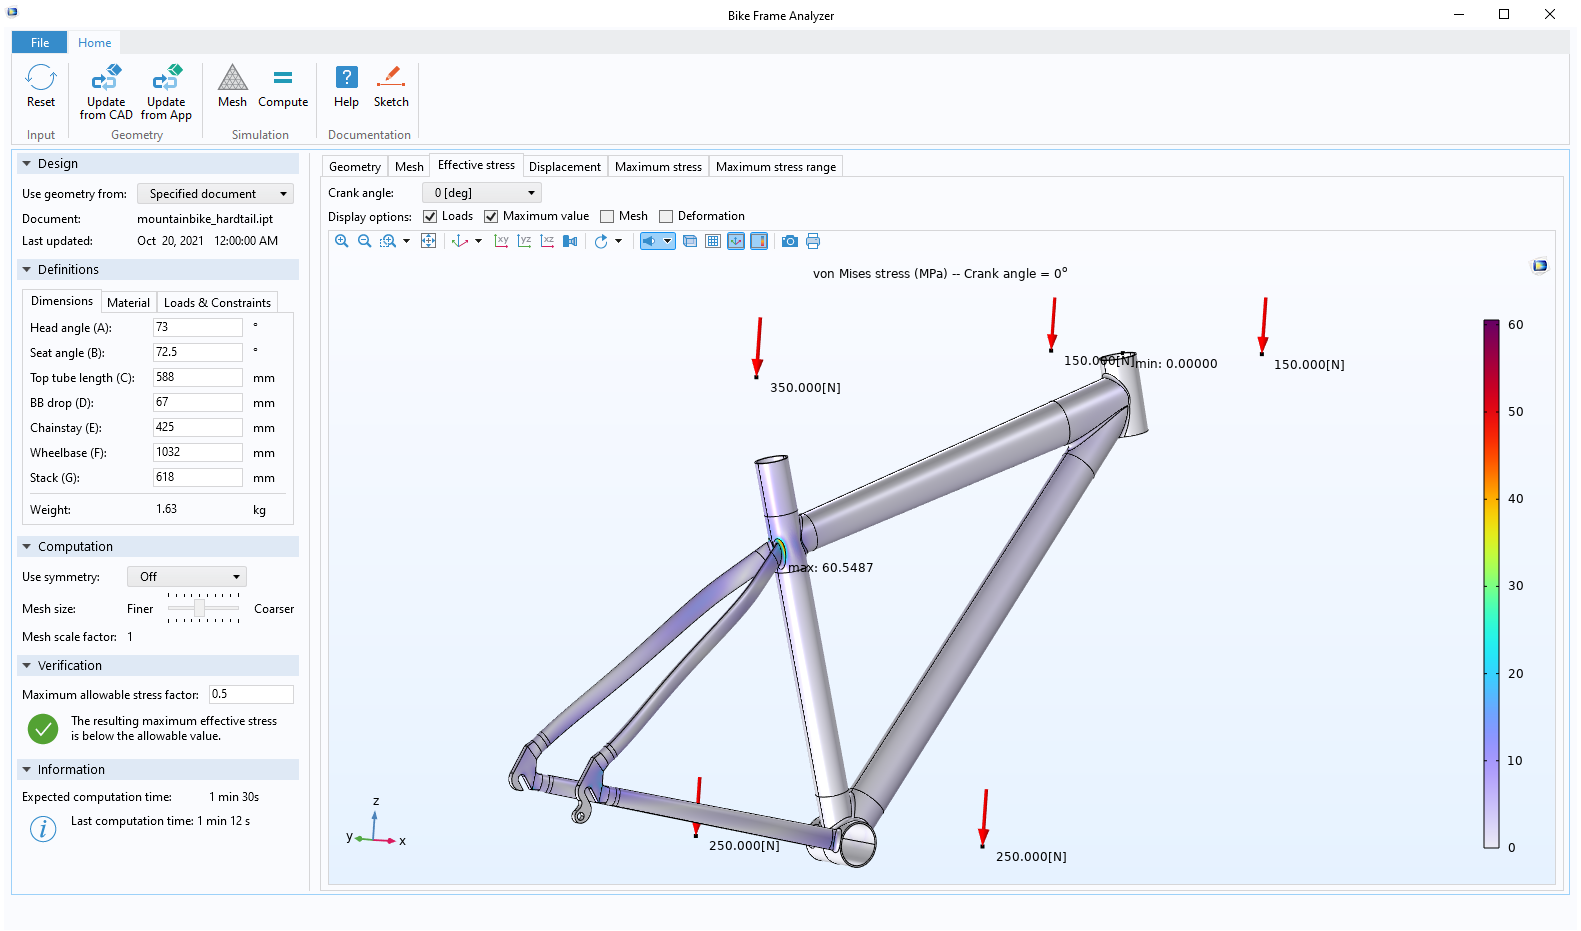 The user interface of a Bike Frame Analyzer app with input fields on the left and the Graphics window on the right.